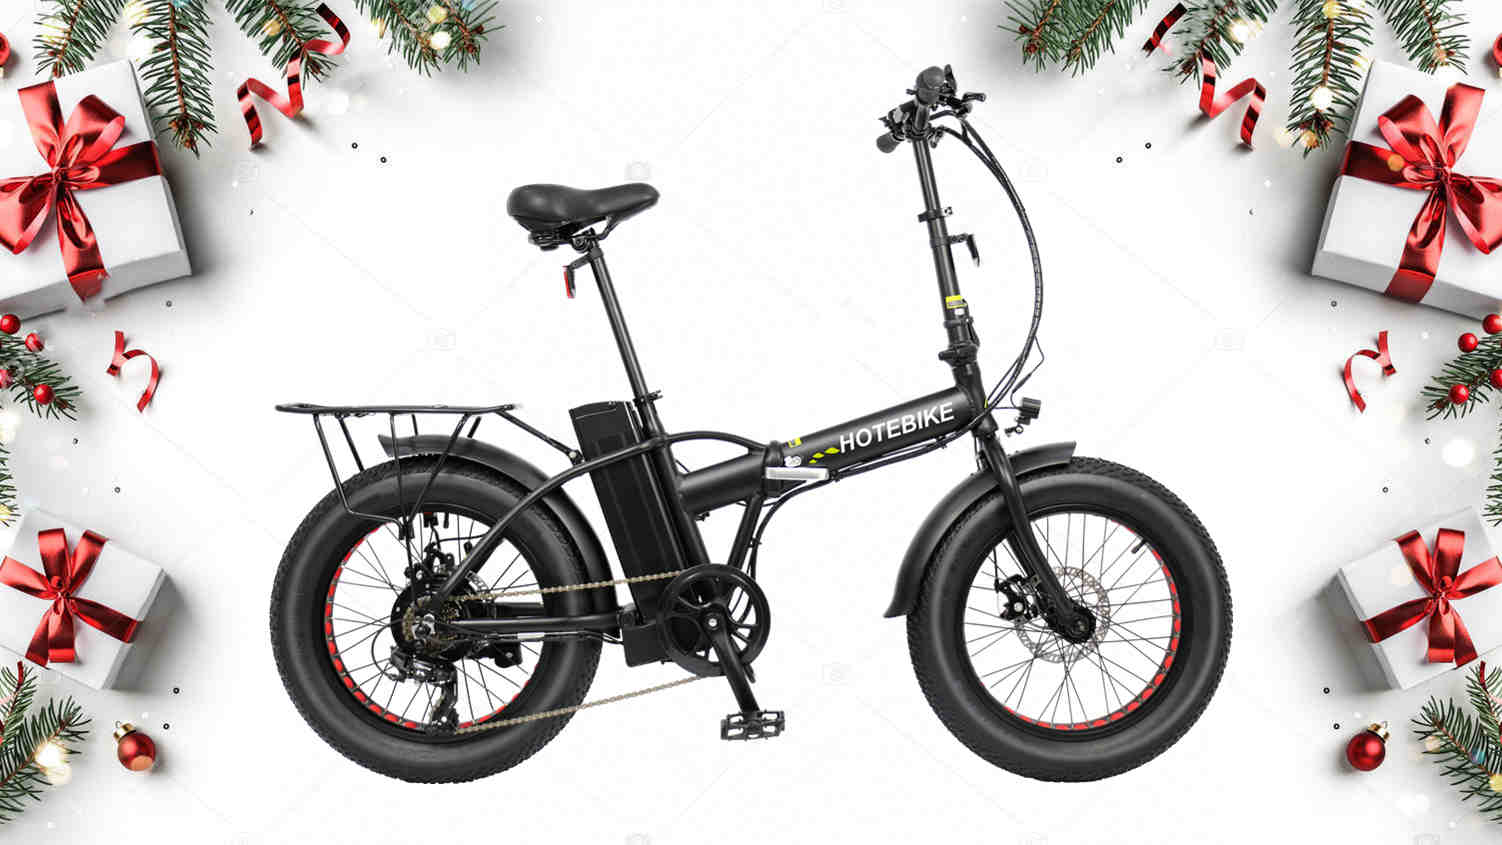 The Best Gift of Electric Bikes for Christmas - Blog - 1